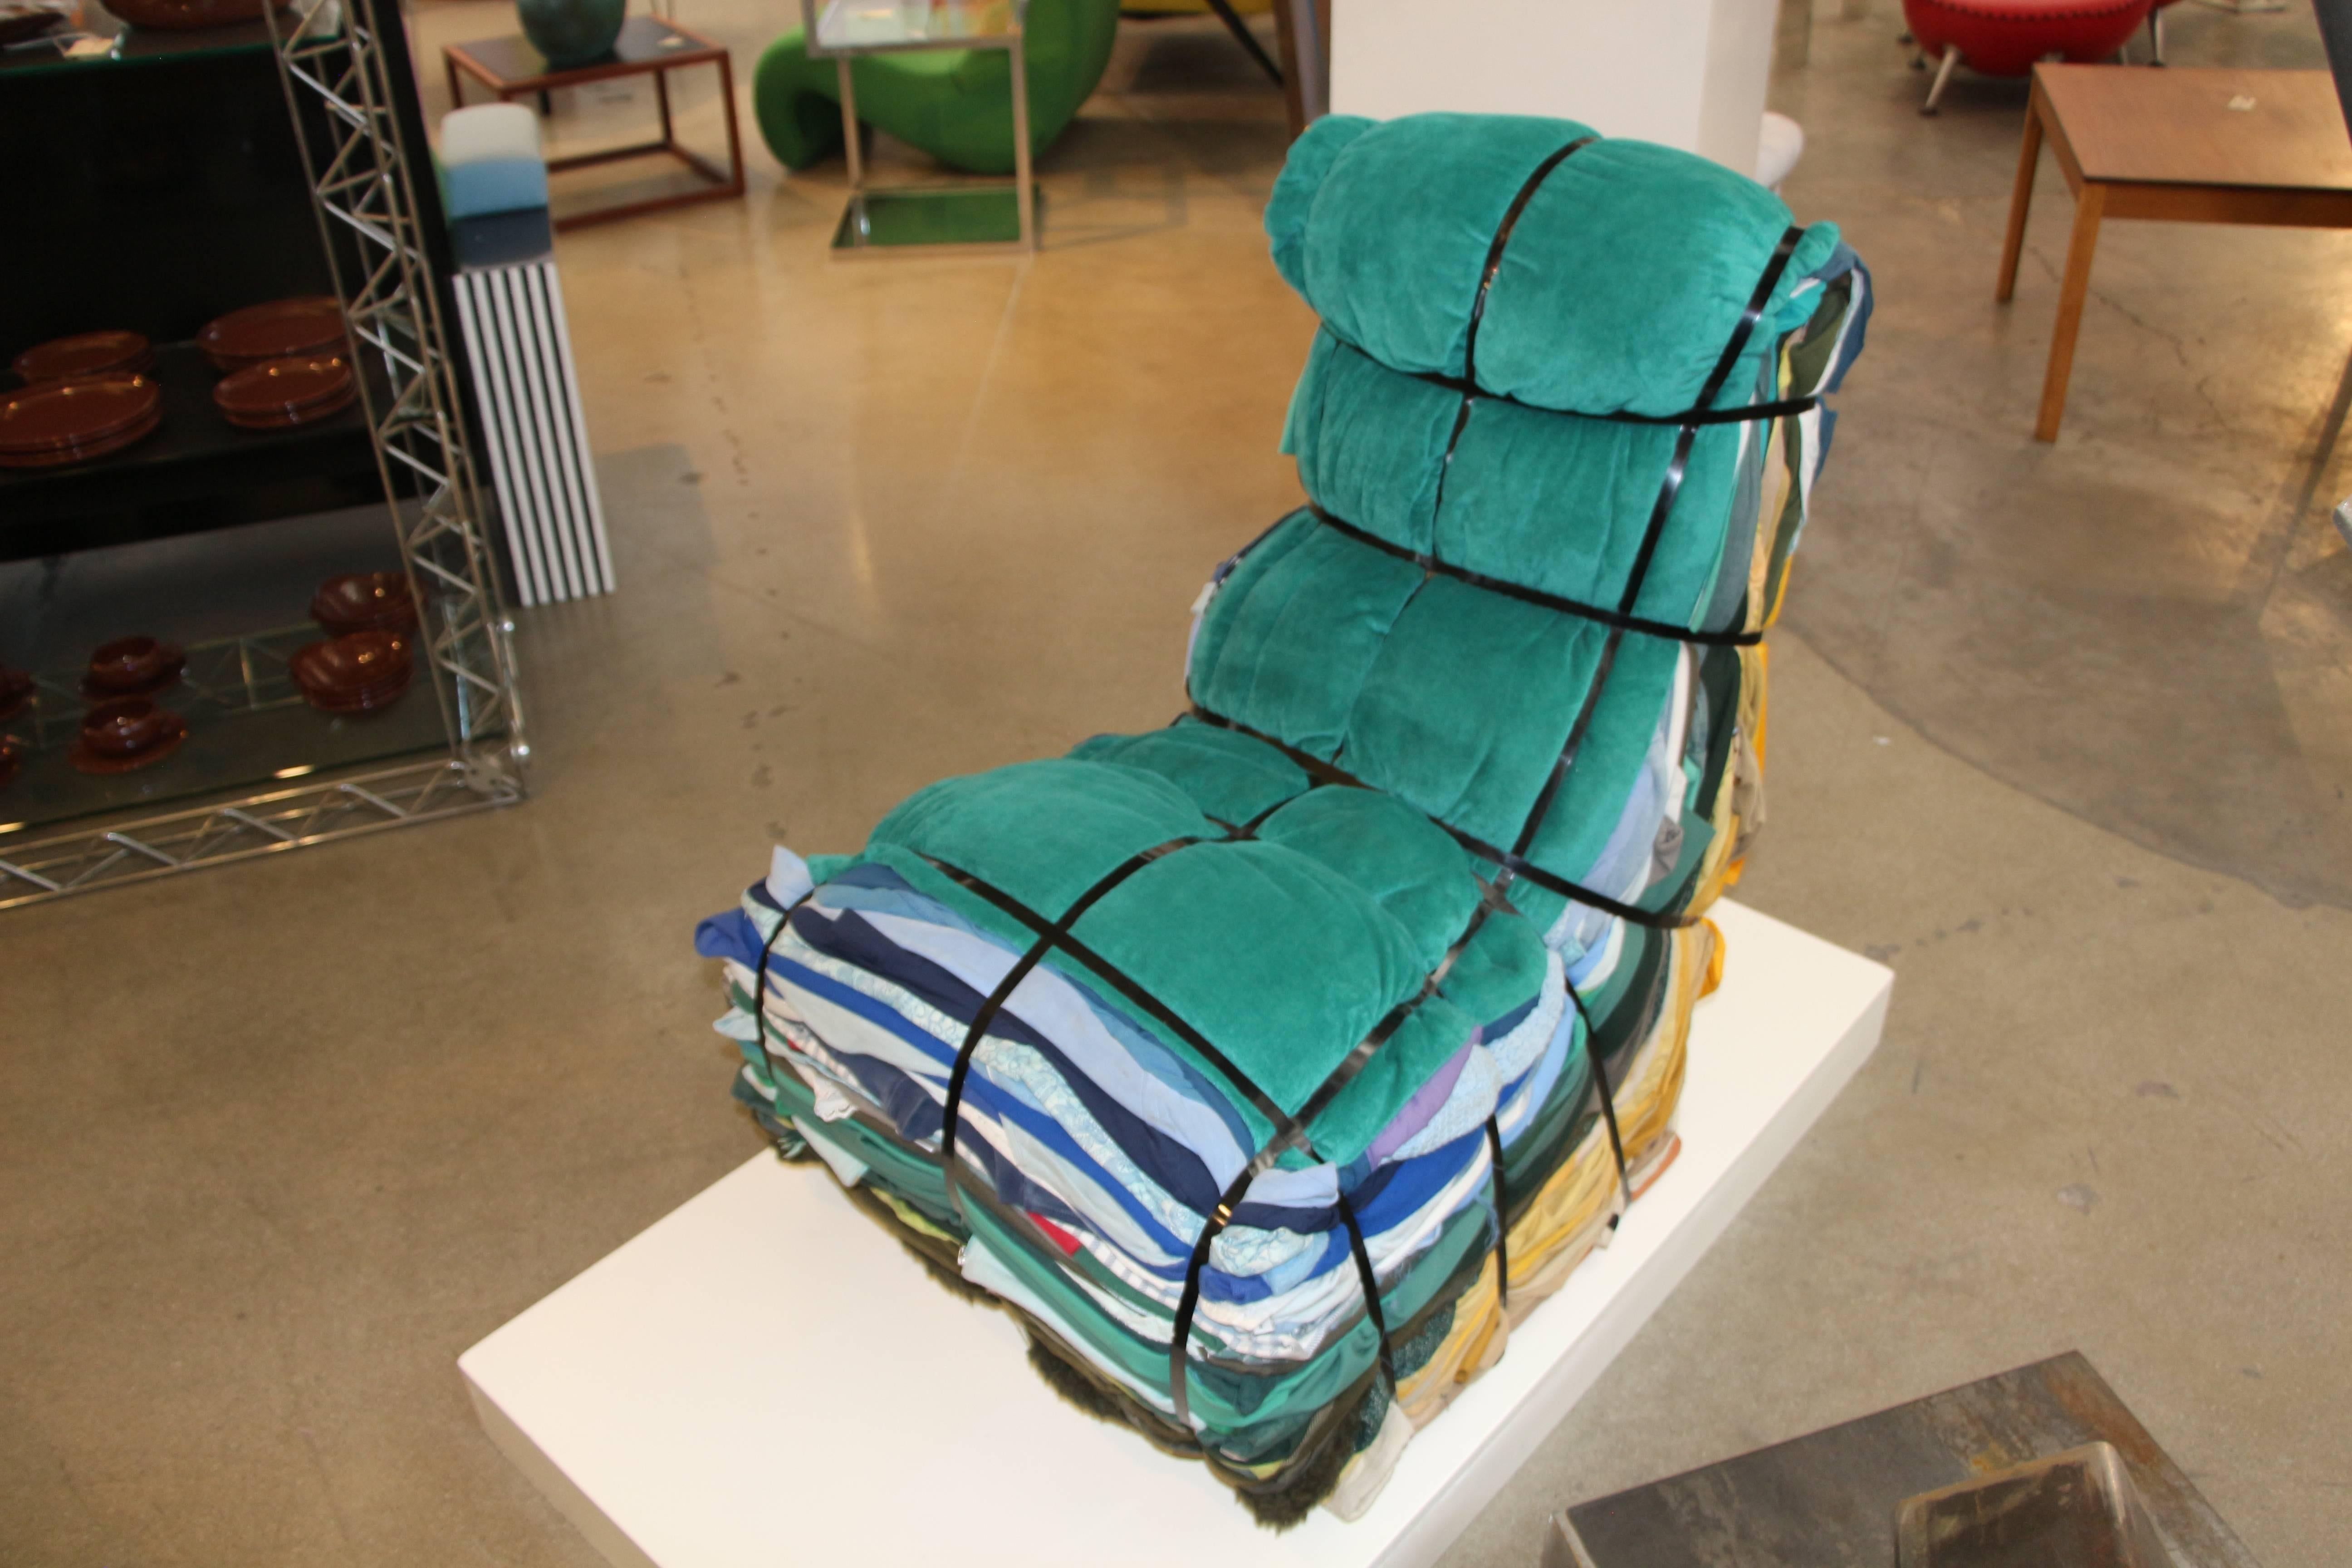 A most unusual chair is this 1990s version of Tejo Remy's iconic rag chair from Droog. This is not a contemporary piece having been purchased in the early 1990s. Great colors used in the selection of fabric. An iconic design sure to endure.
Please